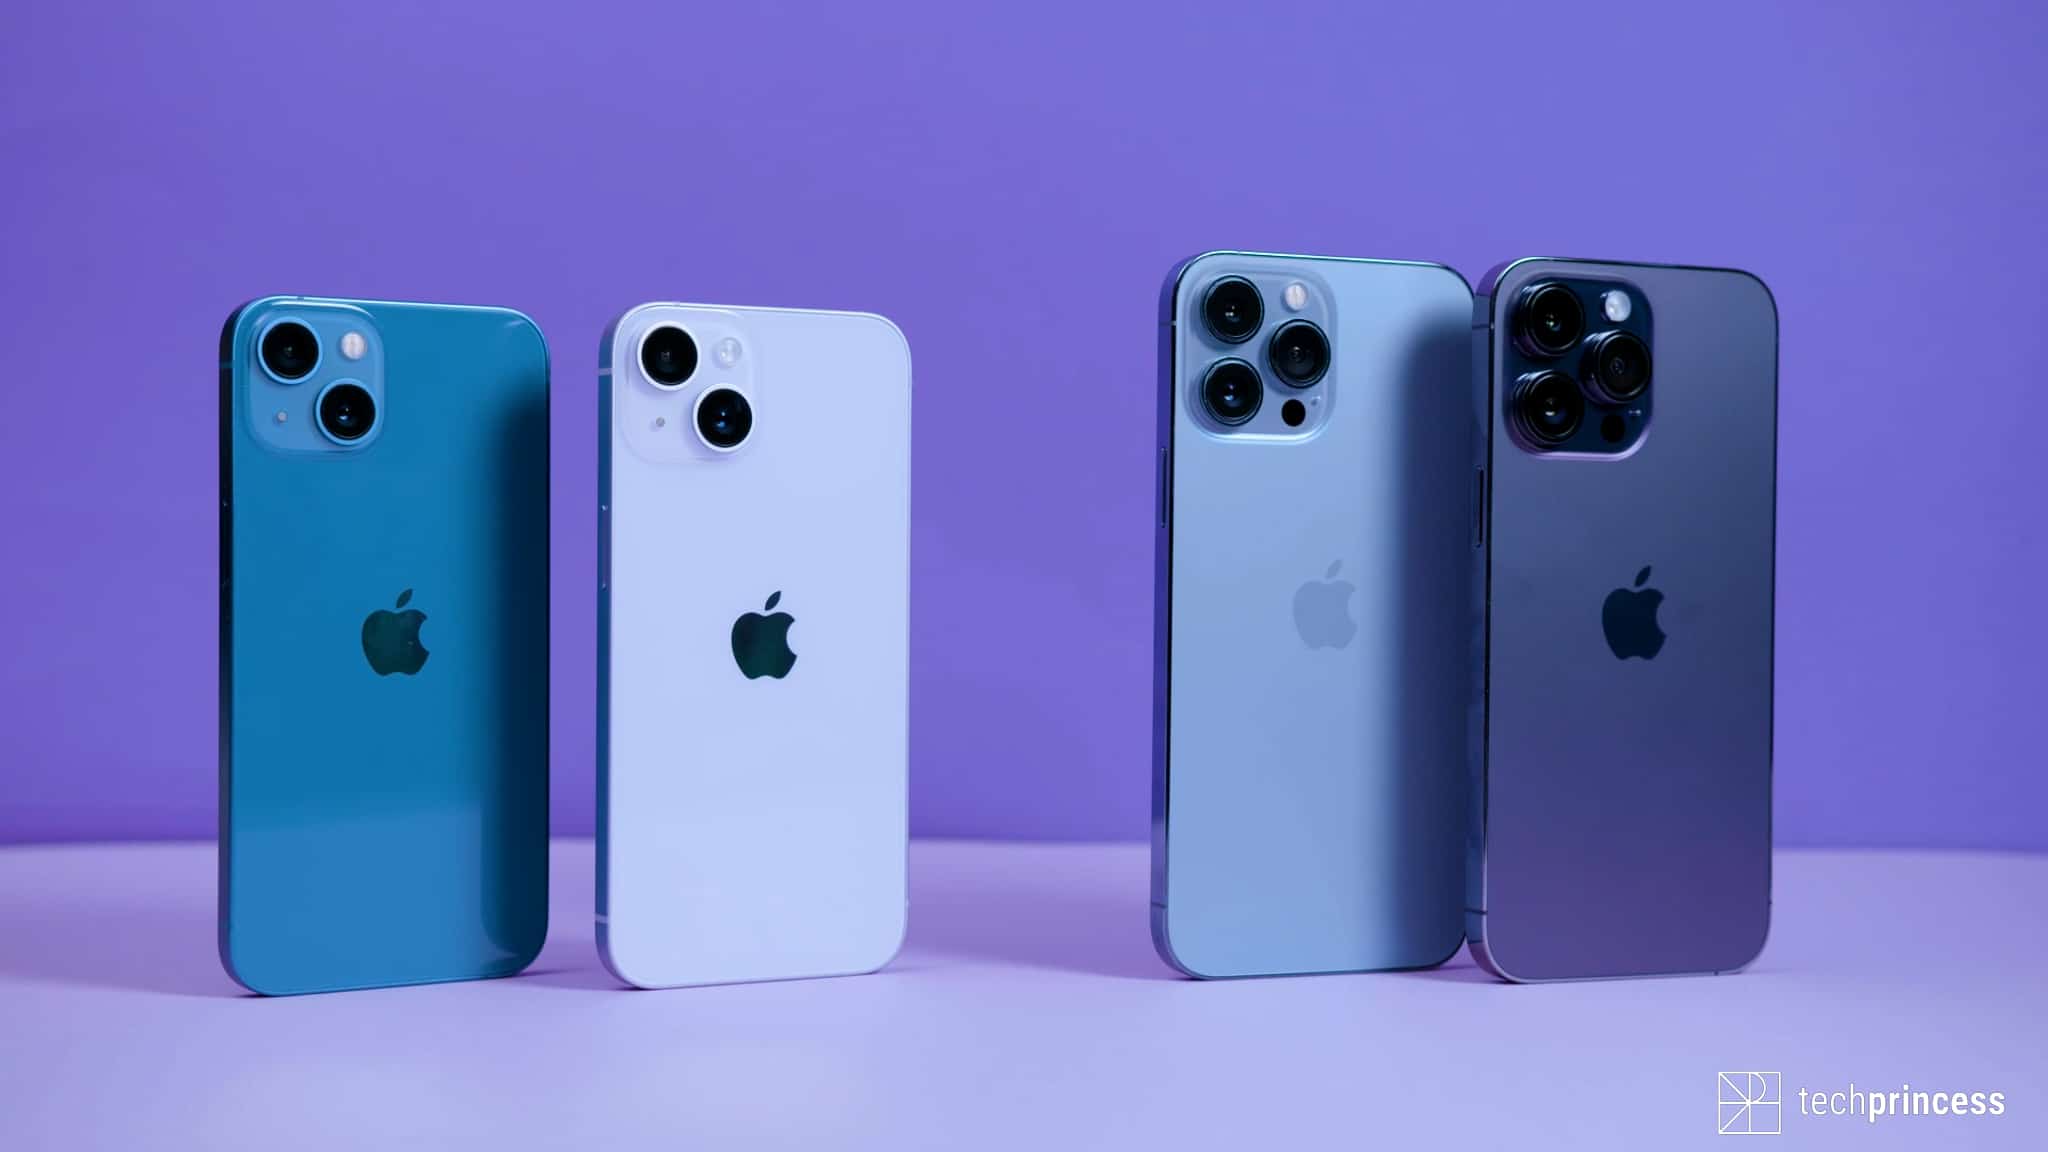 Apple will continue to rely on Qualcomm for its 5G iPhone thumbnail modems